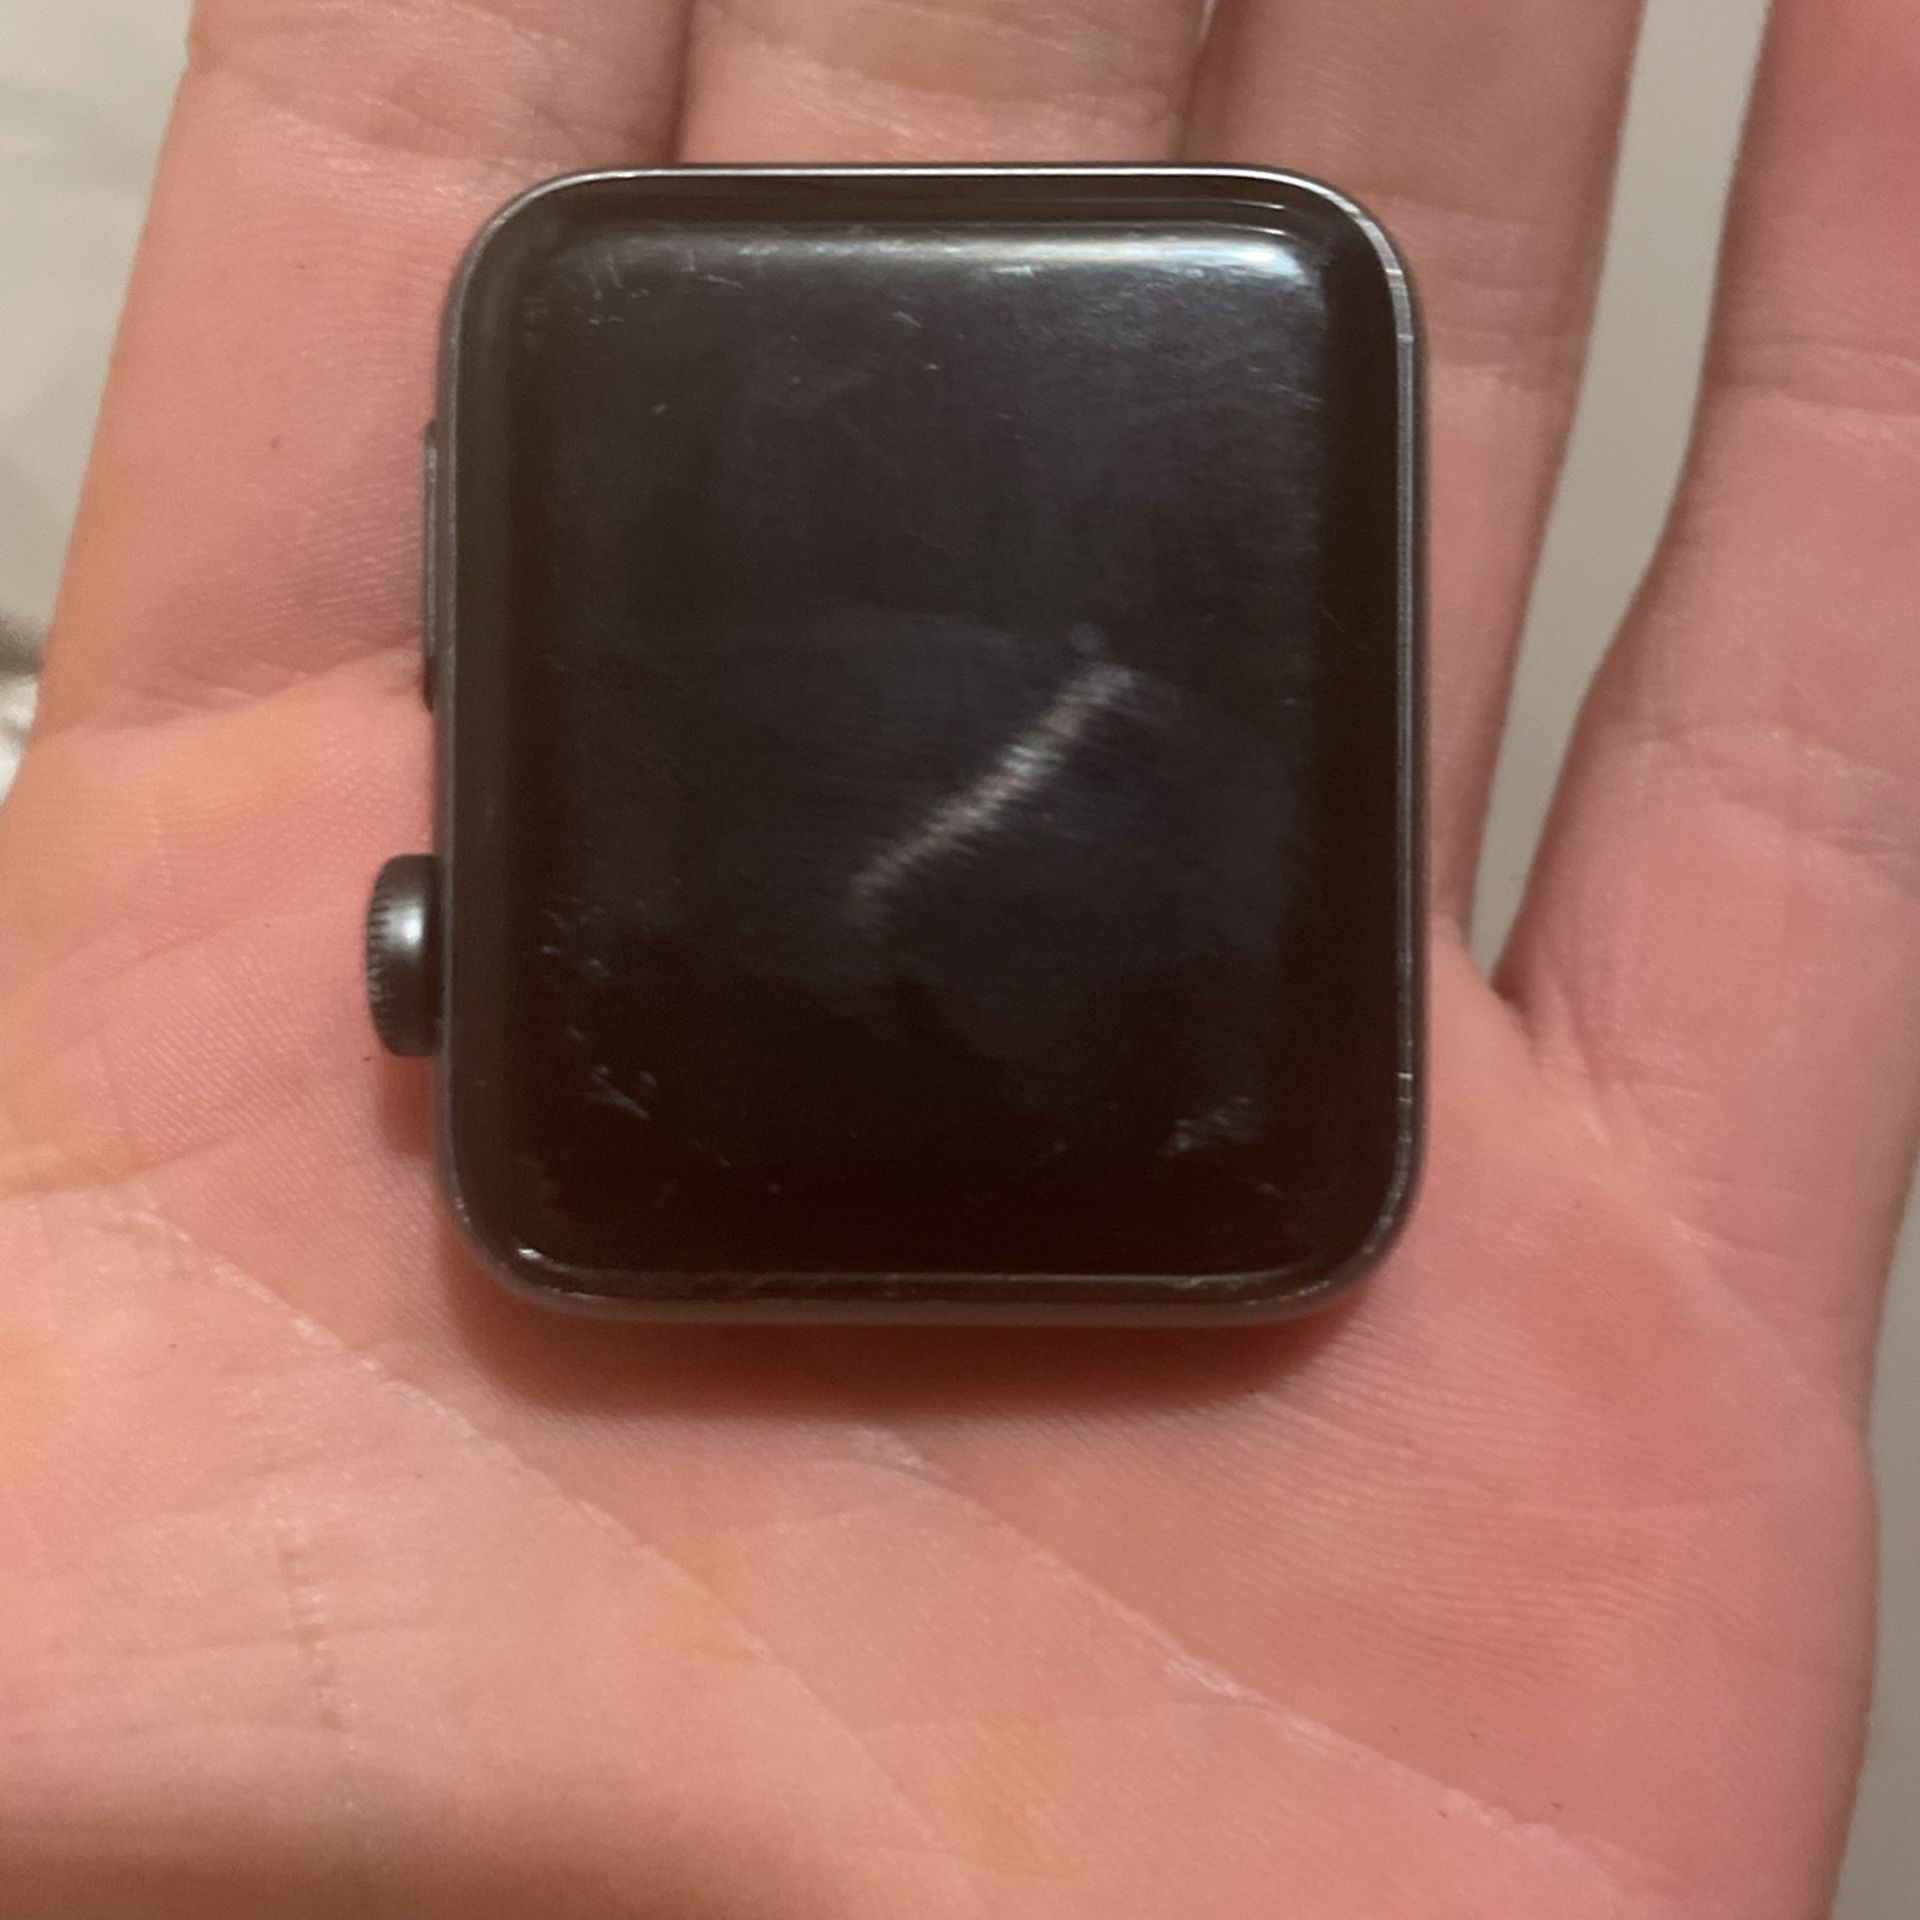 Apple Watch With No Band Comes With Charger And Evething Just Not The Band. 